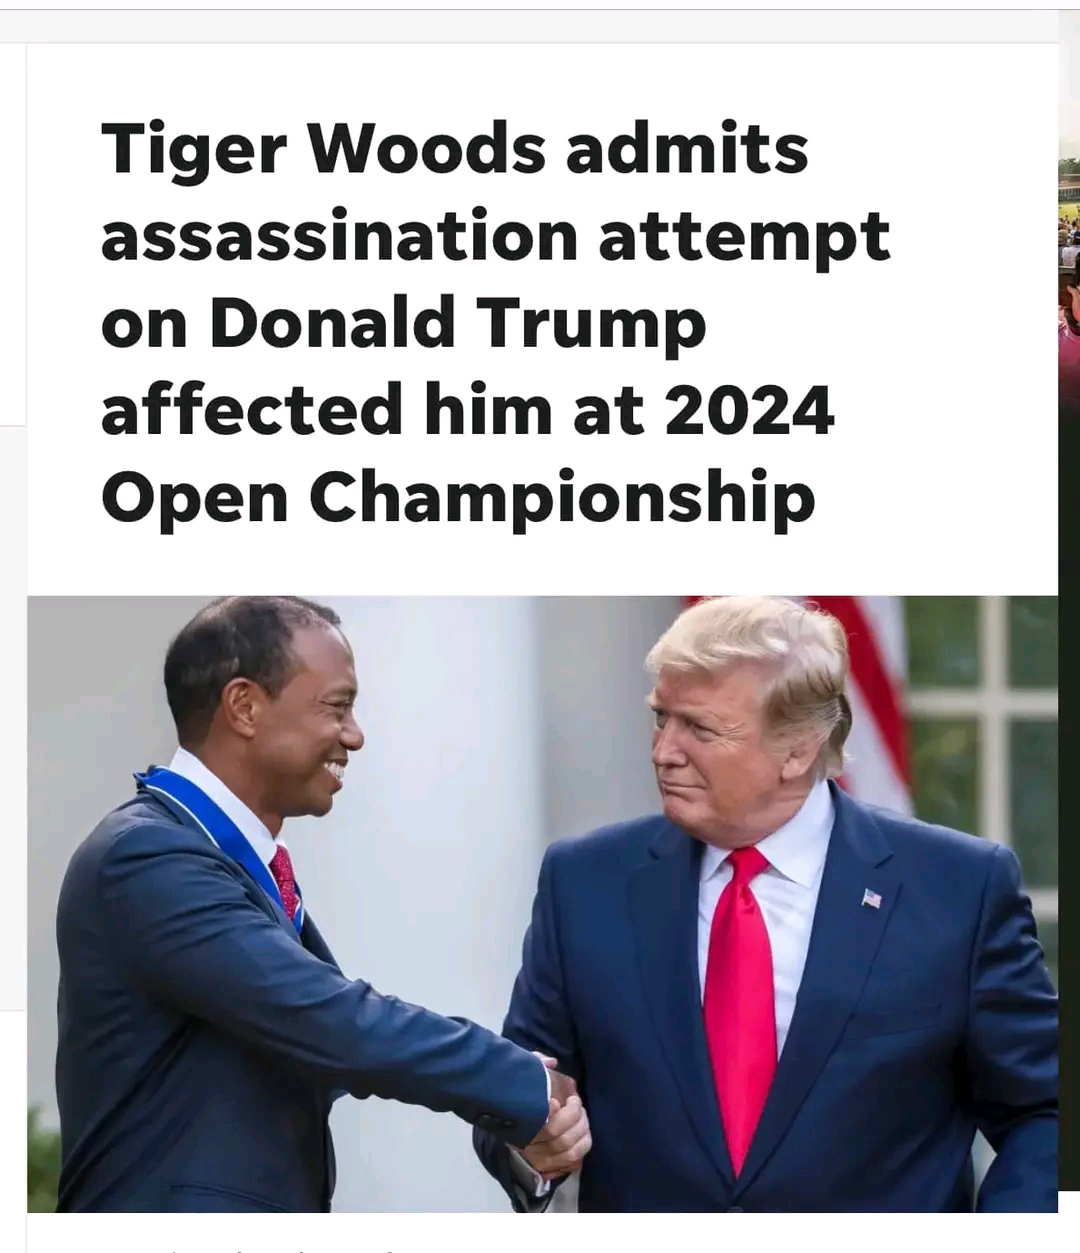 Tiger Woods sends crucial massage to President Donald J. Trump after assassination attempts